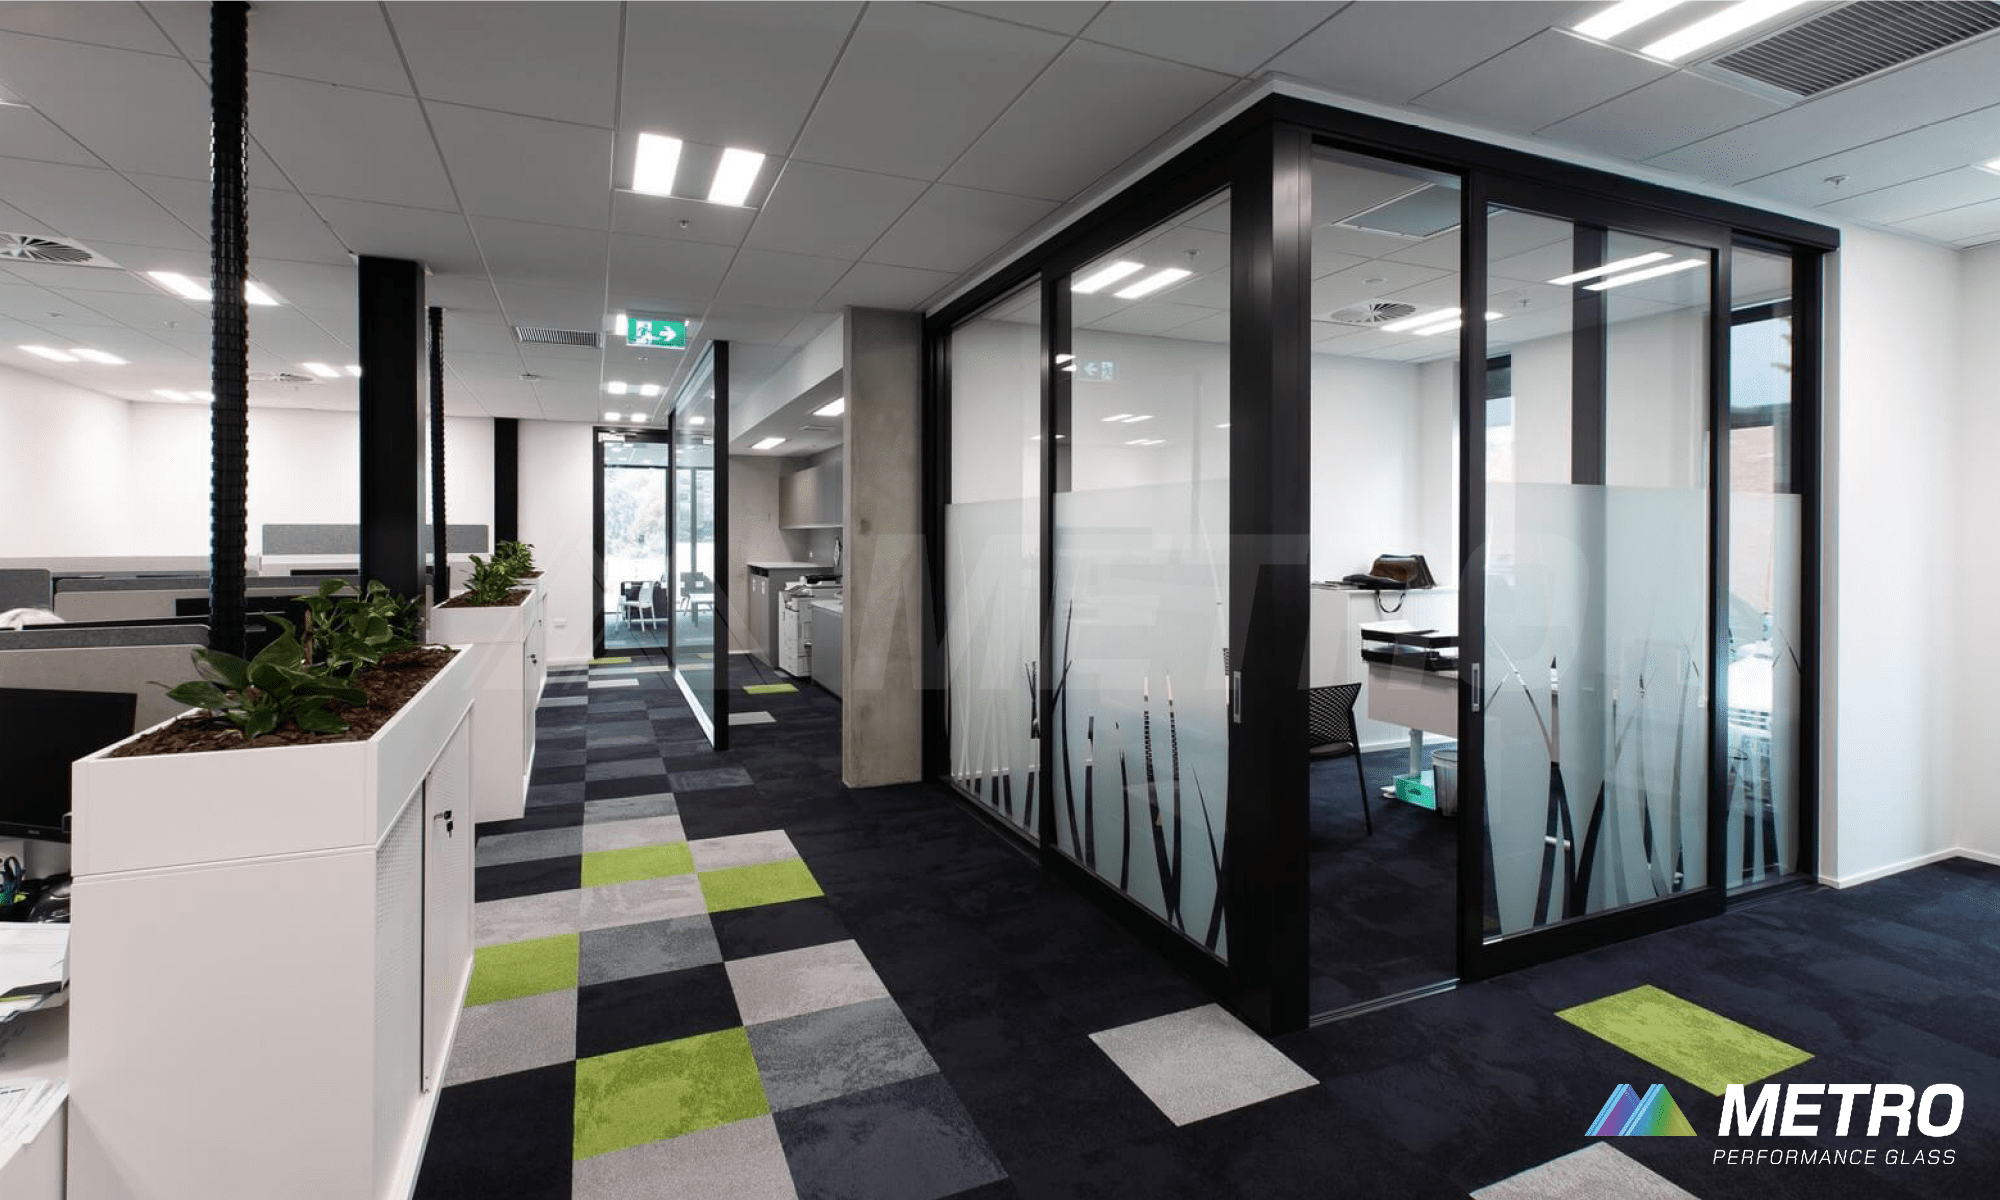 Commercial office space with frosted glass walls and patterned flooring